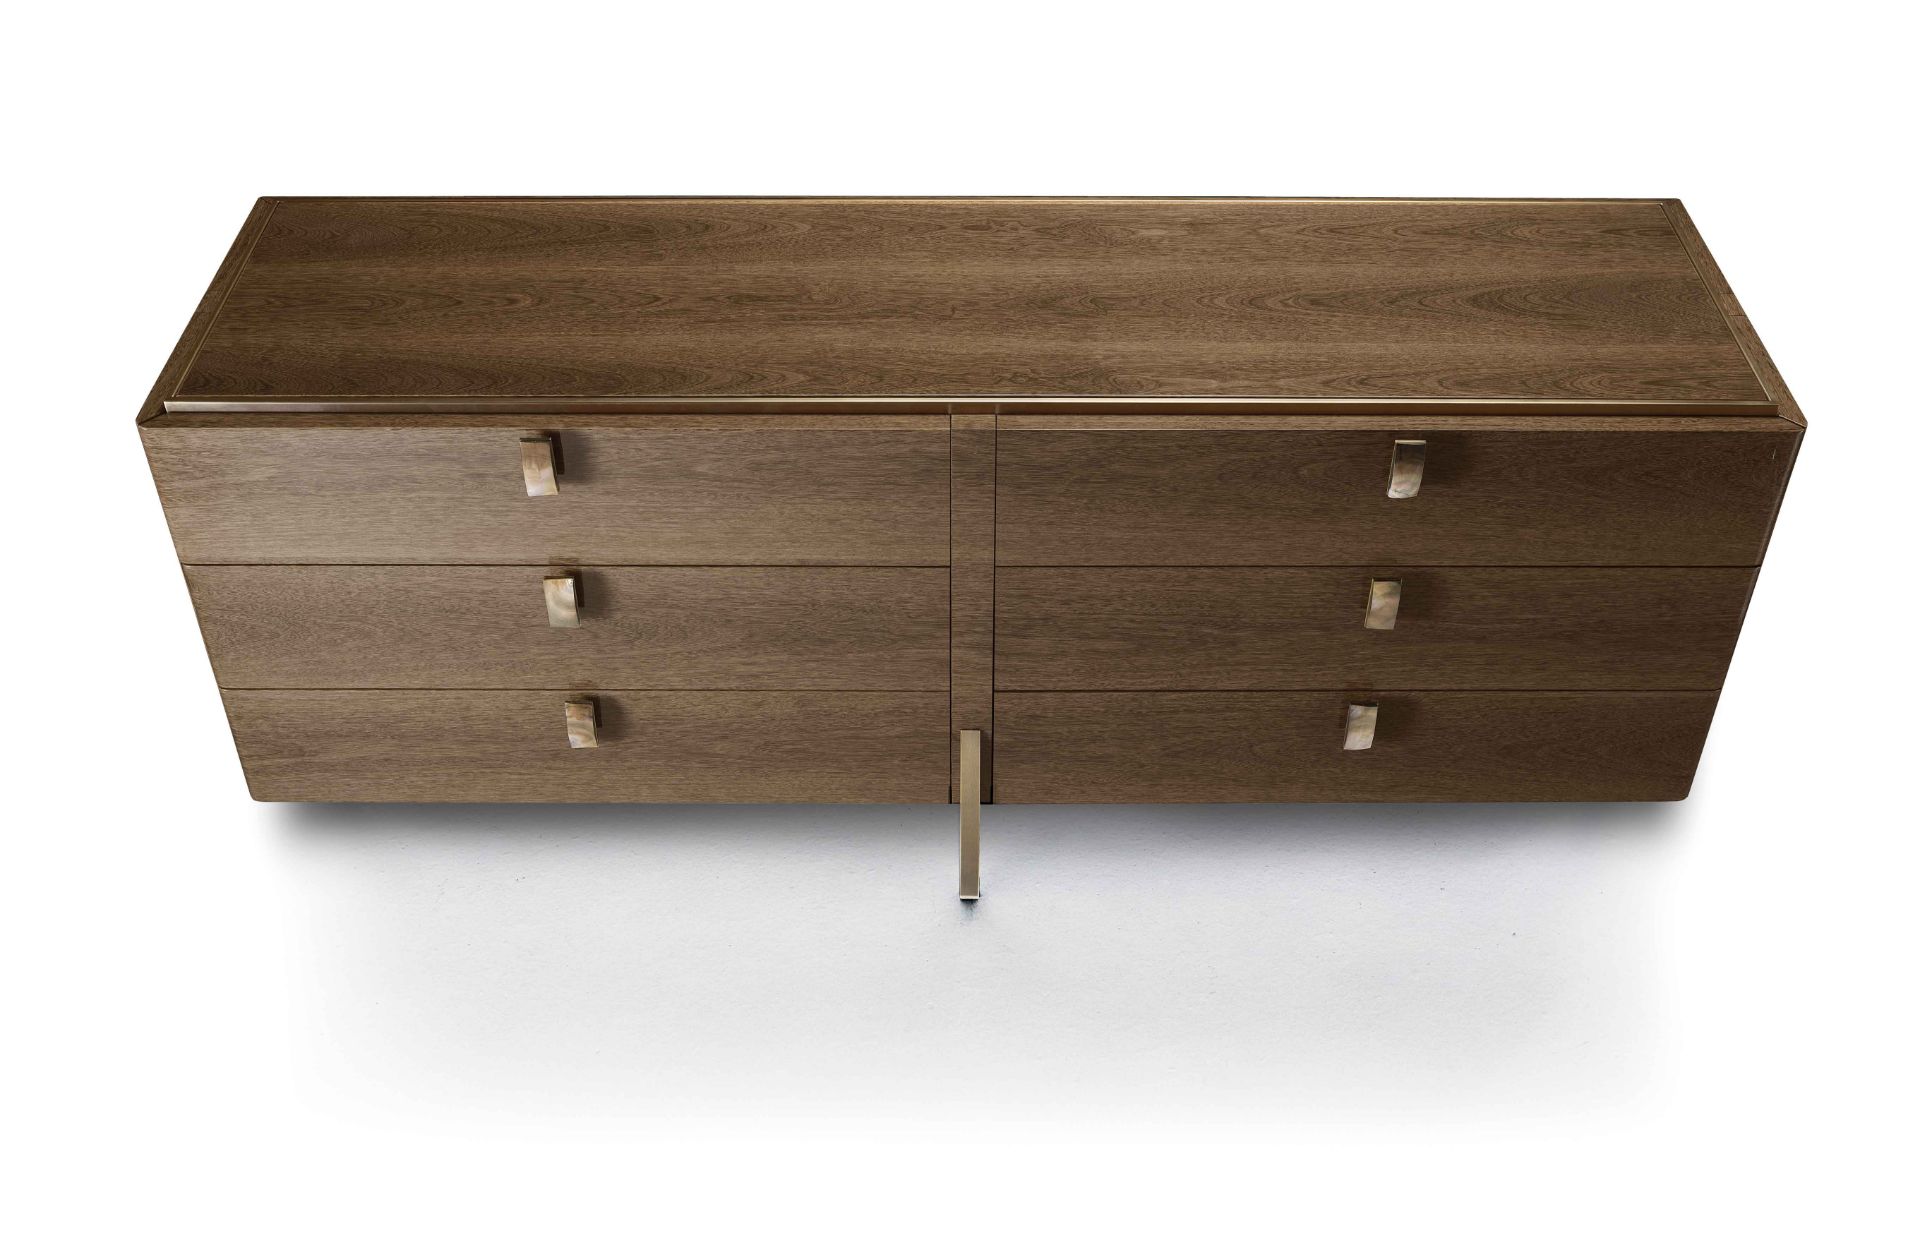 Fashion Affair Bedroom Cabinet by Telemaco for Malerba The Dresser has six drawers, is decorated - Image 2 of 15